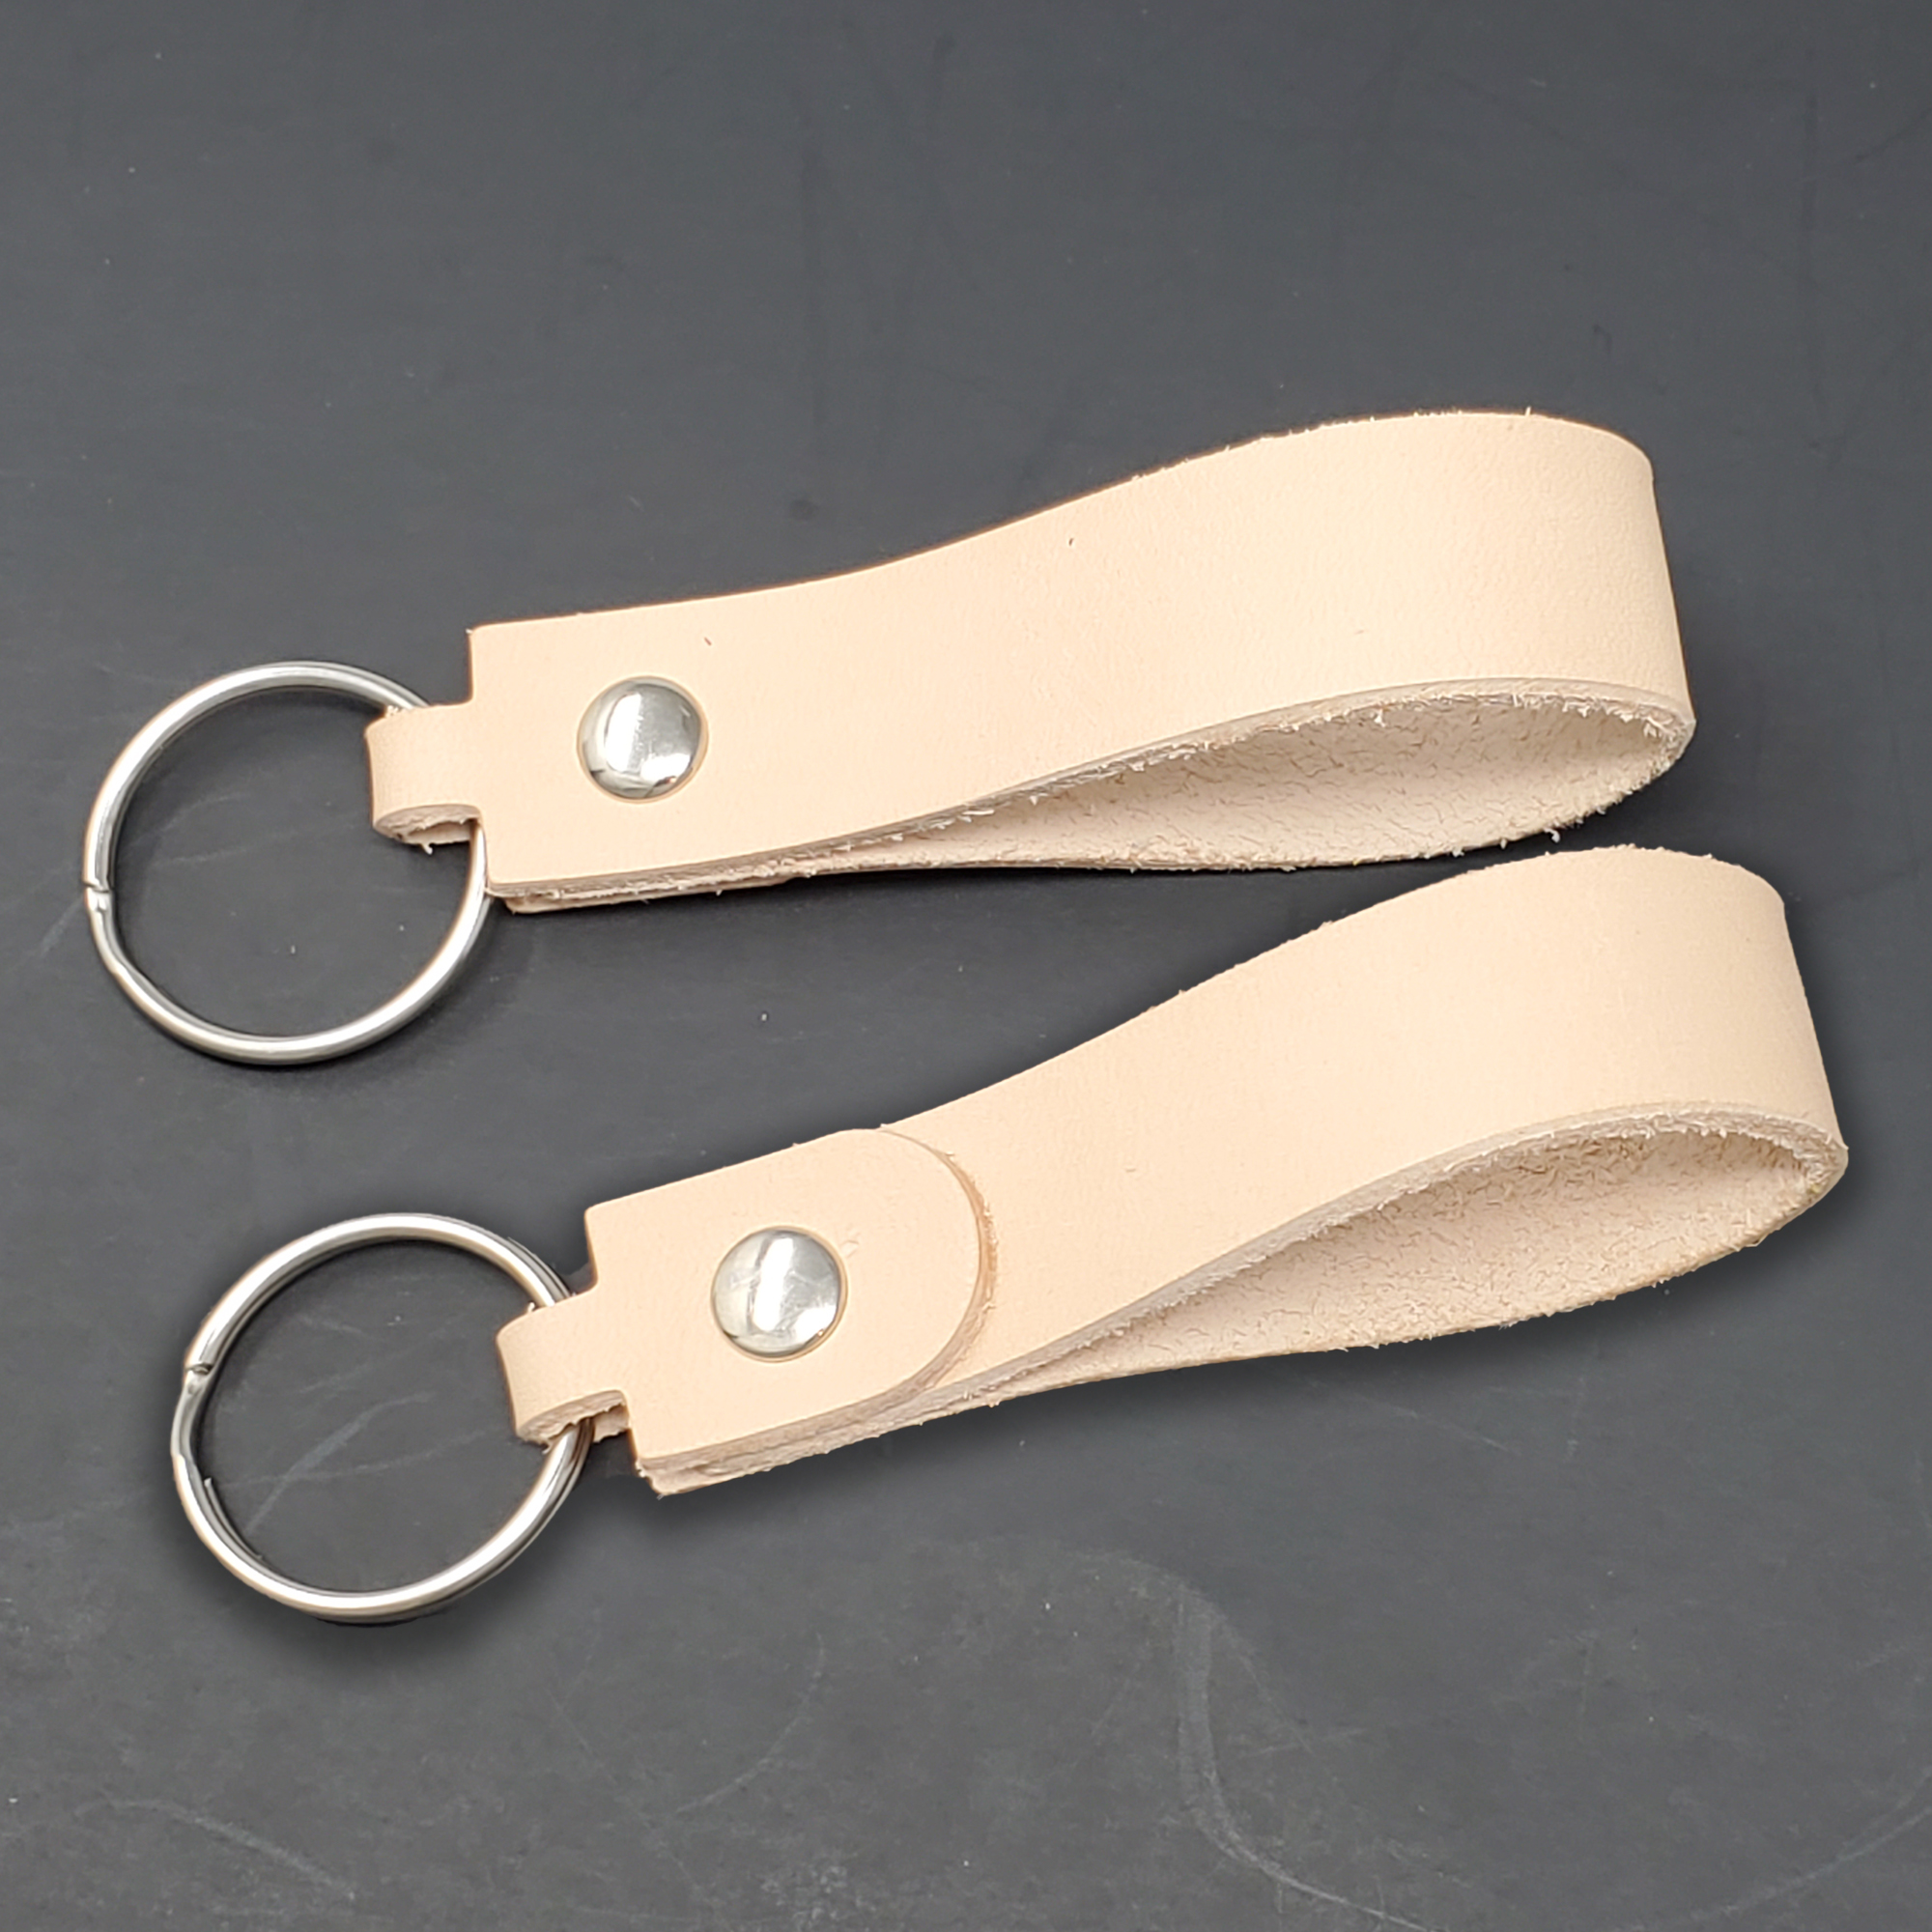 Natural Leather Key Fob, 1 Pound Coin 23mm, Ring Holder, Keychain